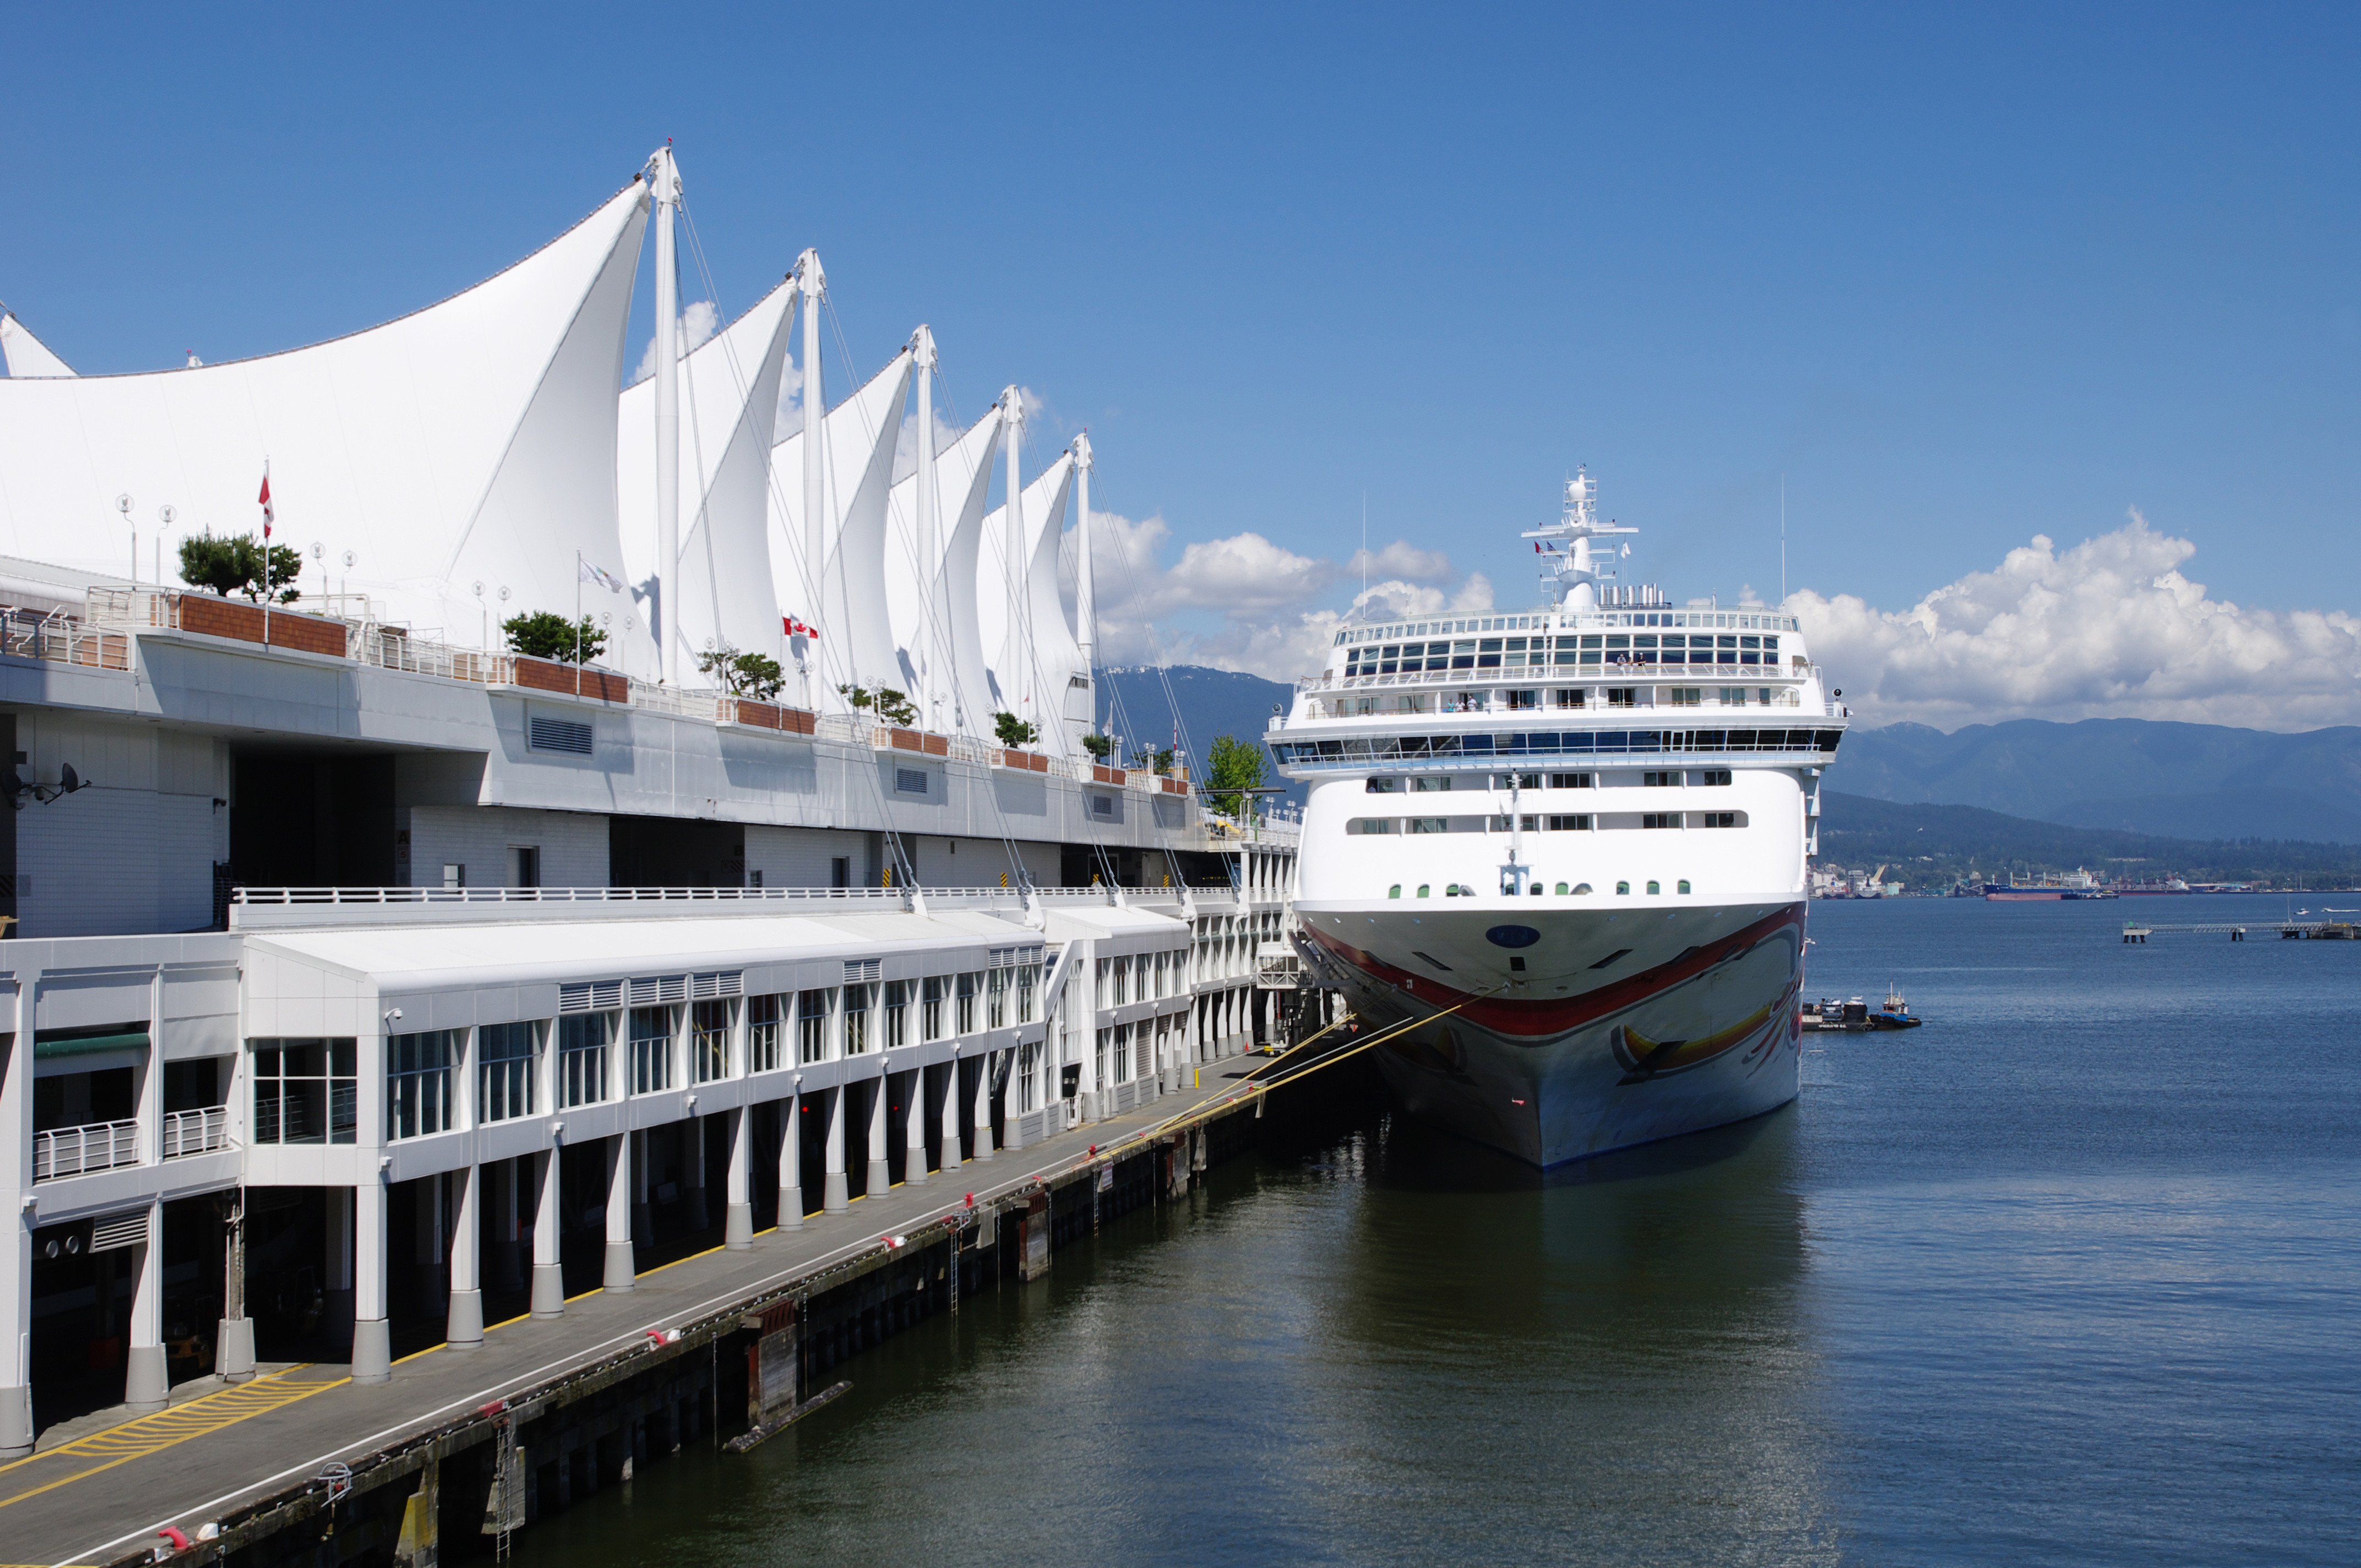 Luxury cruise ship in harbour Vancouver , British Columbia, Canada - Picture of the Day #21